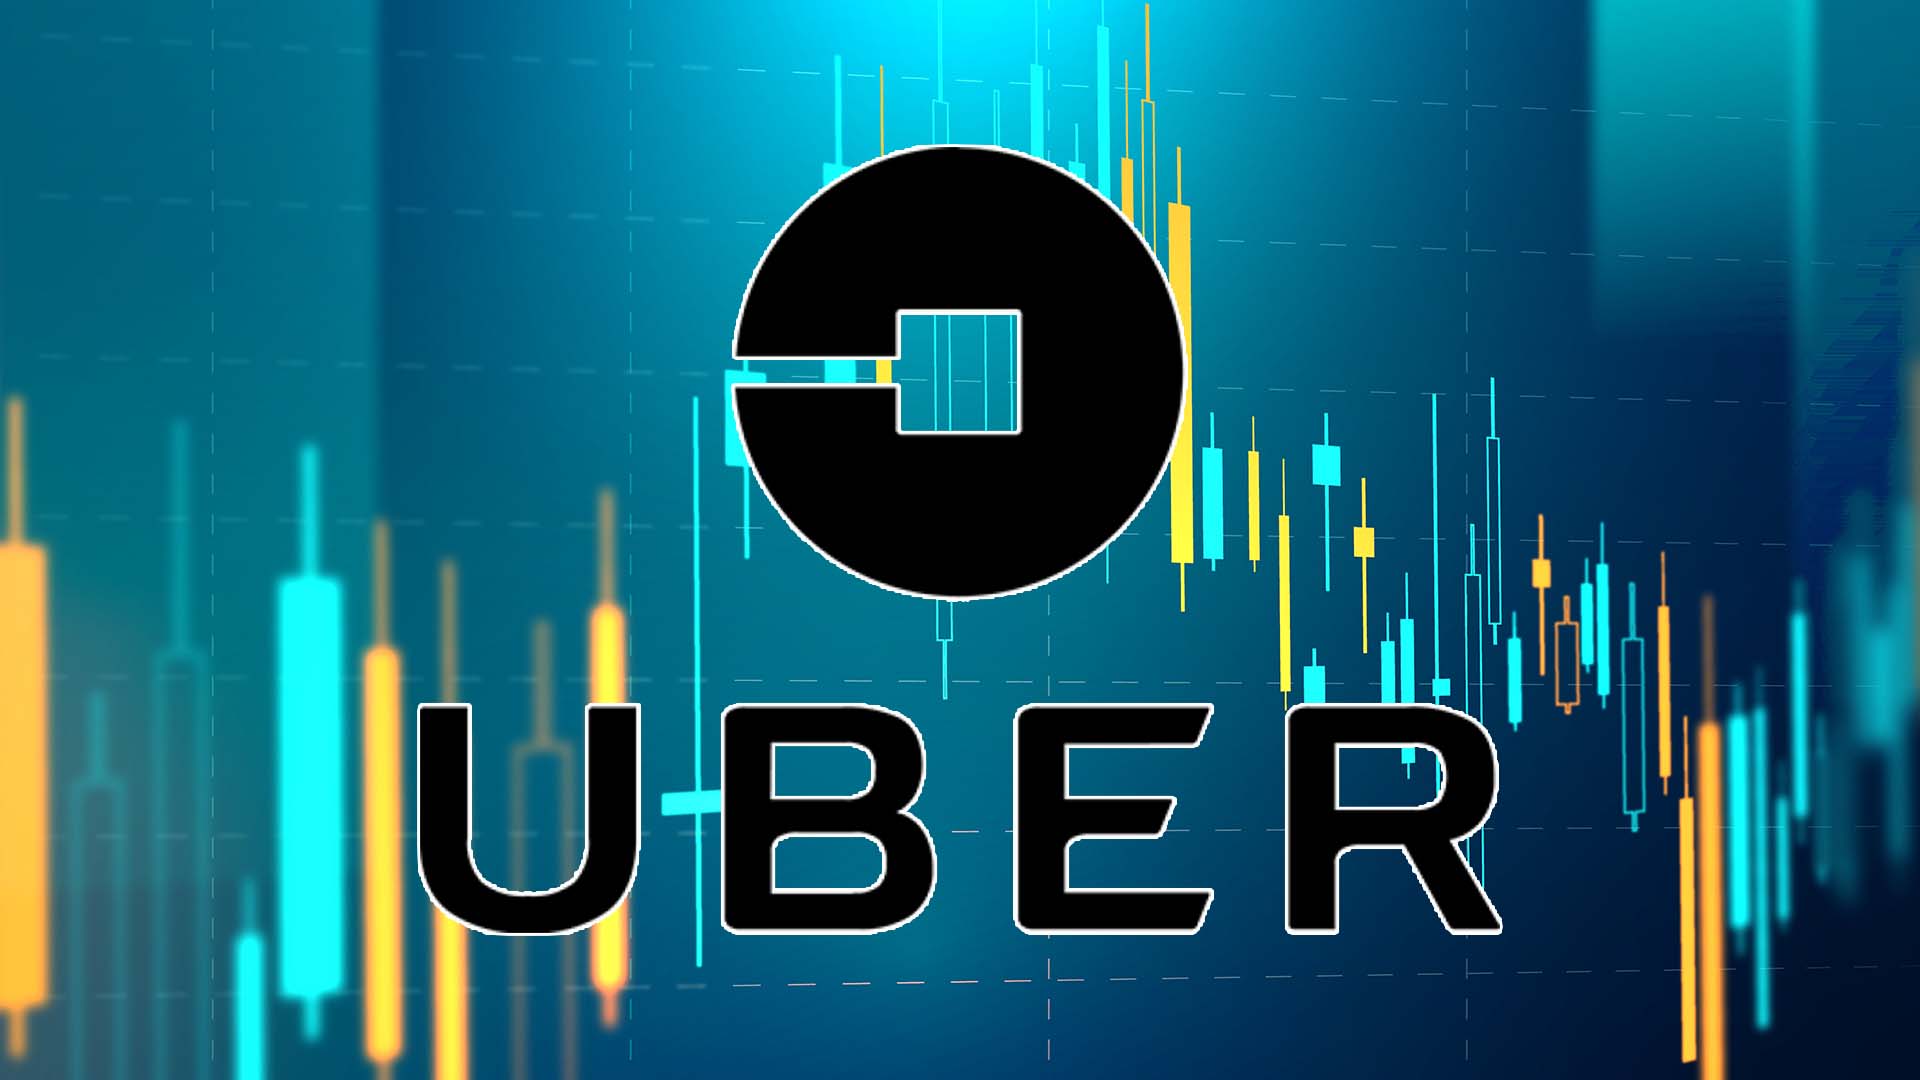 Uber Share Price Remains Near Its Surged Level With Strong Financials